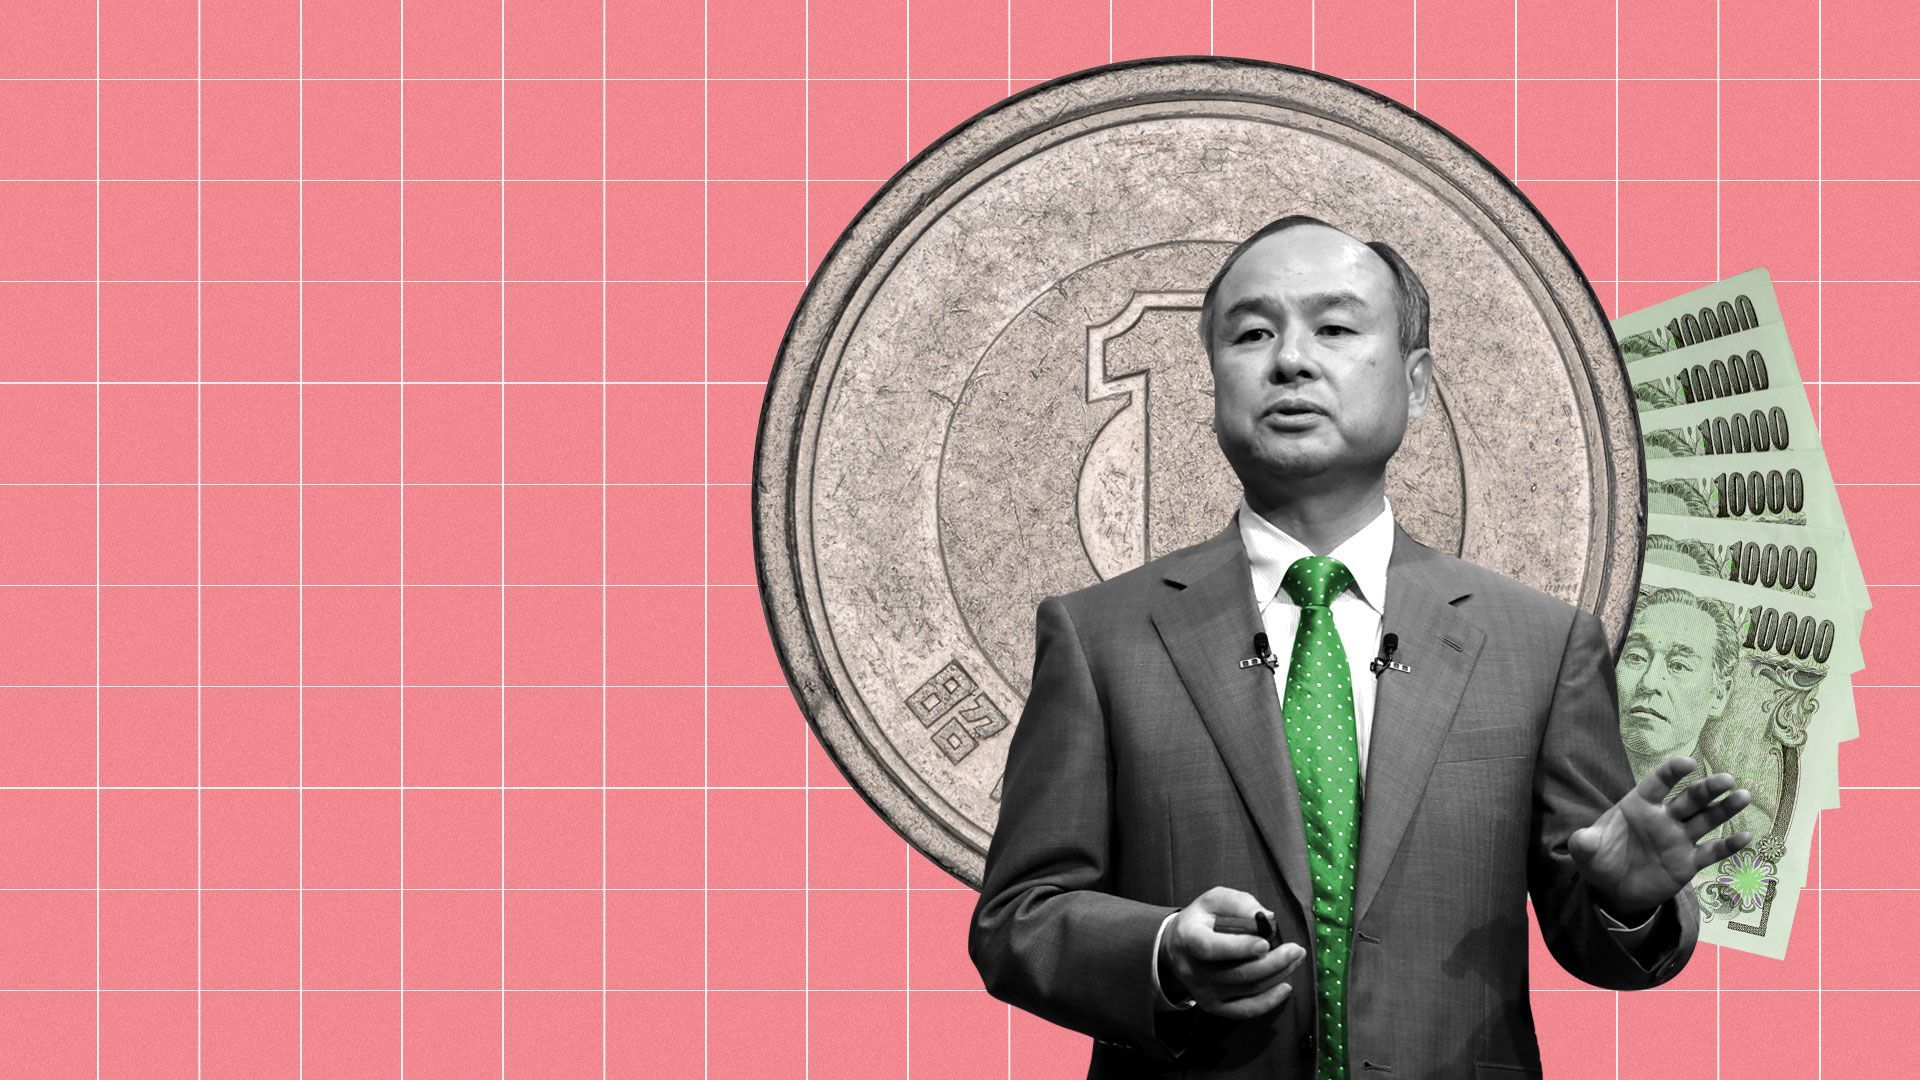 Photo illustration of Masa Son with Japanese Yen coin and bills behind him.